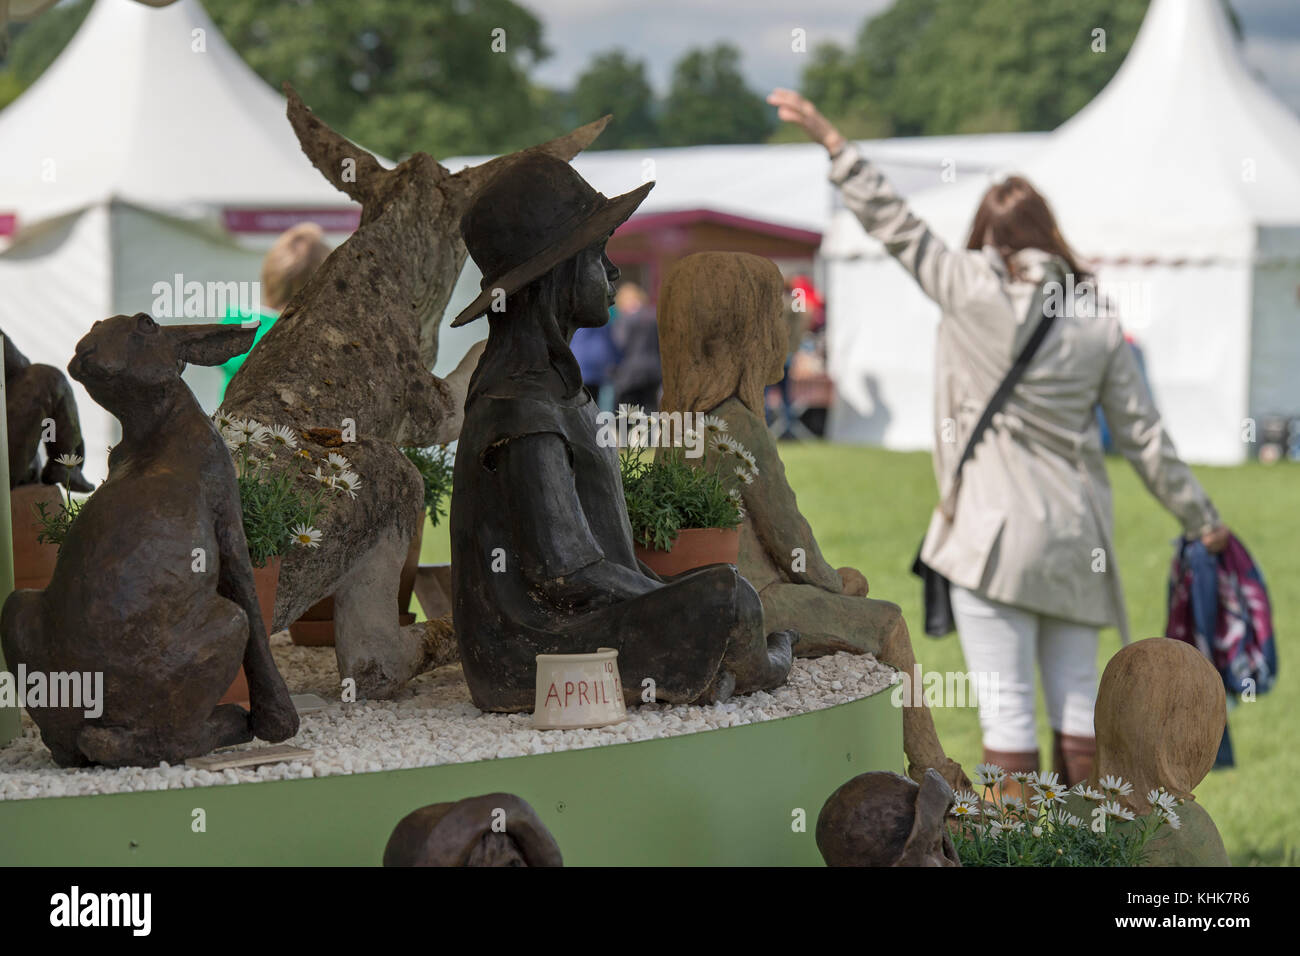 Close-up of figurative sculptures on Ann Hogben trade stand with one woman beyond - RHS Chatsworth Flower show showground, Derbyshire, England, UK. Stock Photo